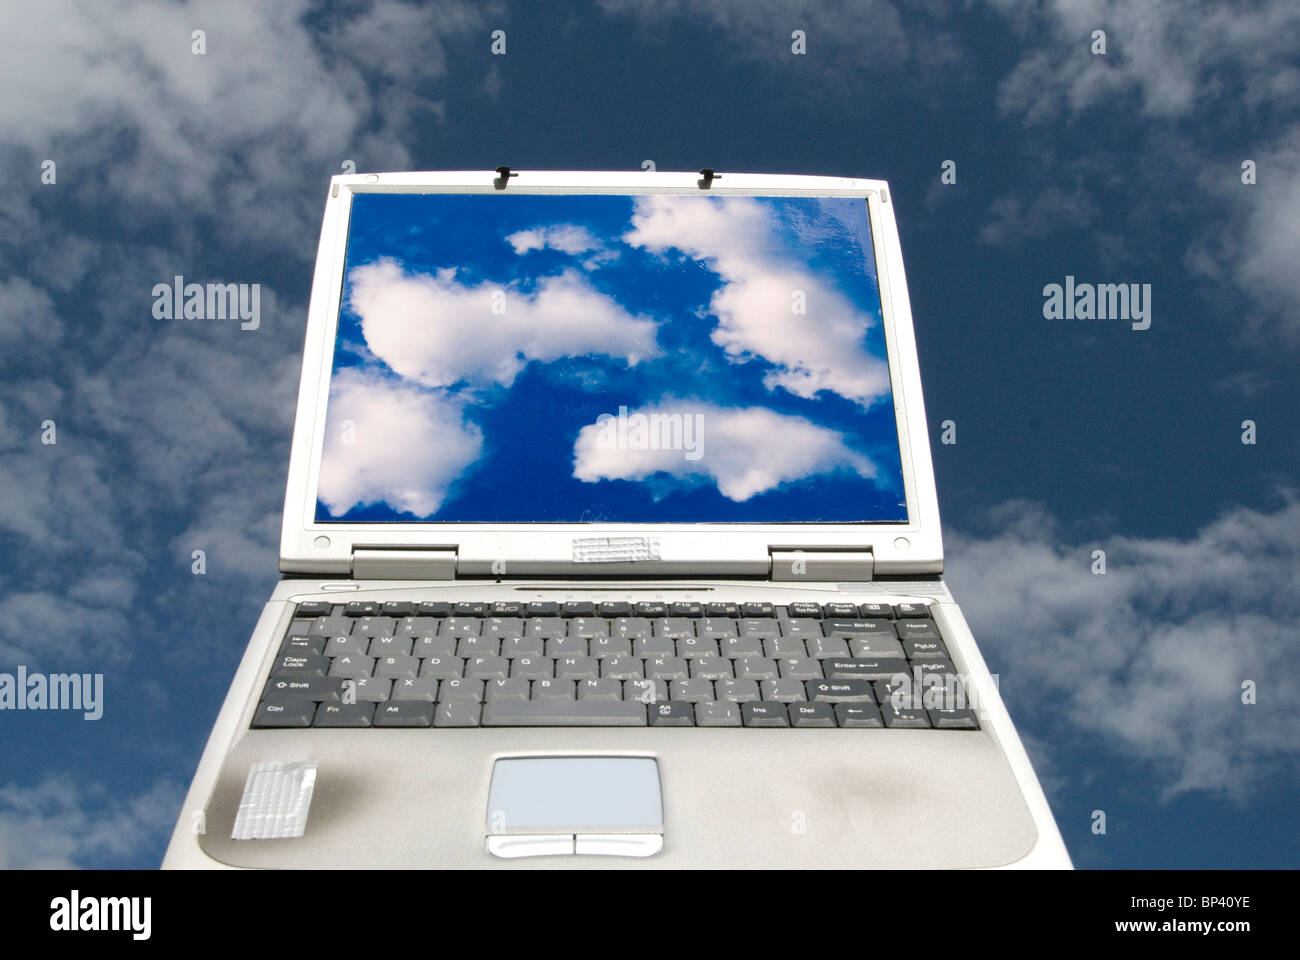 laptop computer with cloud images and clouds in background representing cloud computing Stock Photo